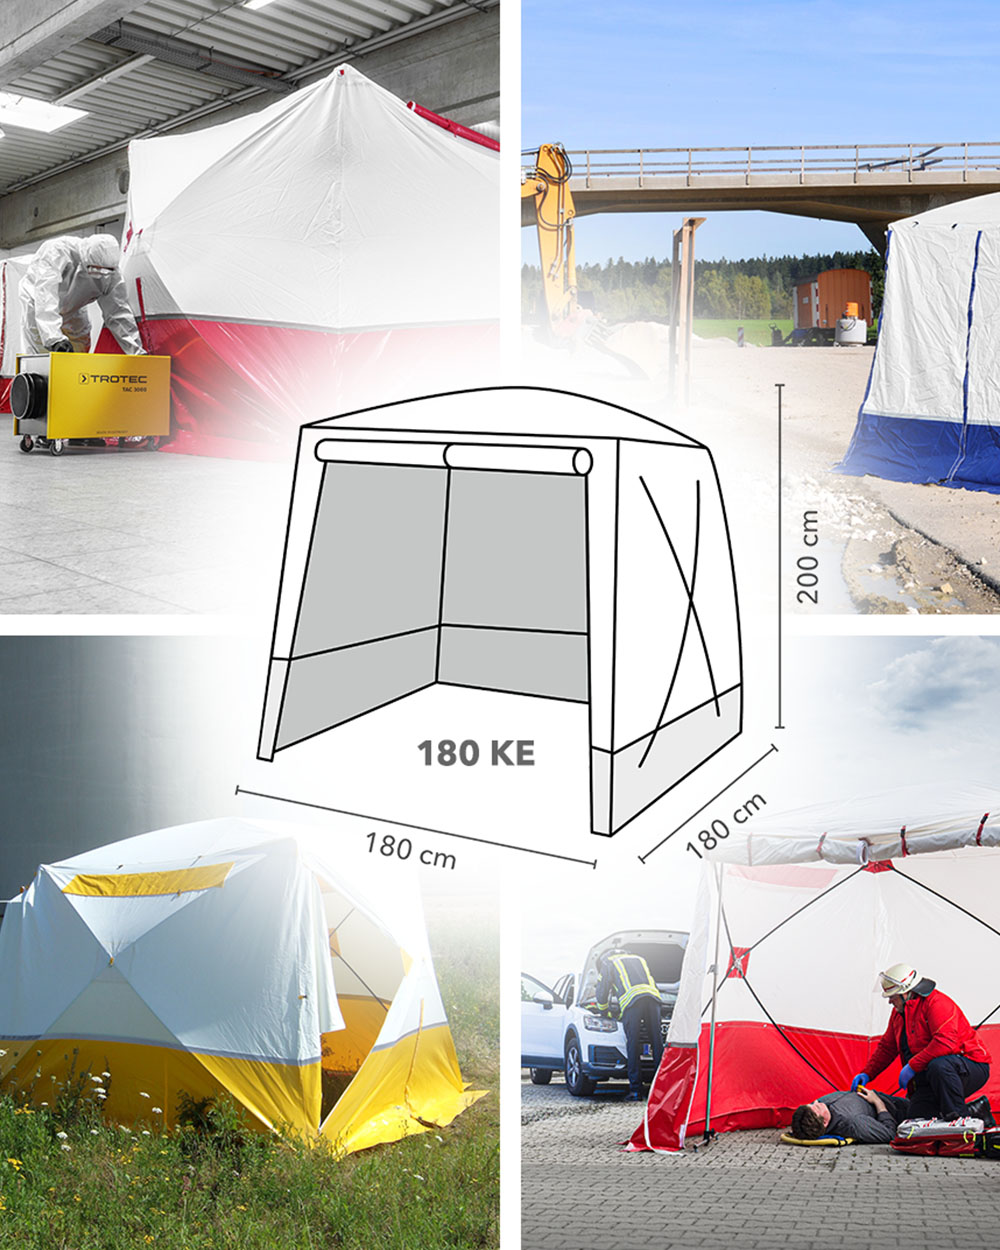 Flat-roofed tent 180 KE – universally applicable!